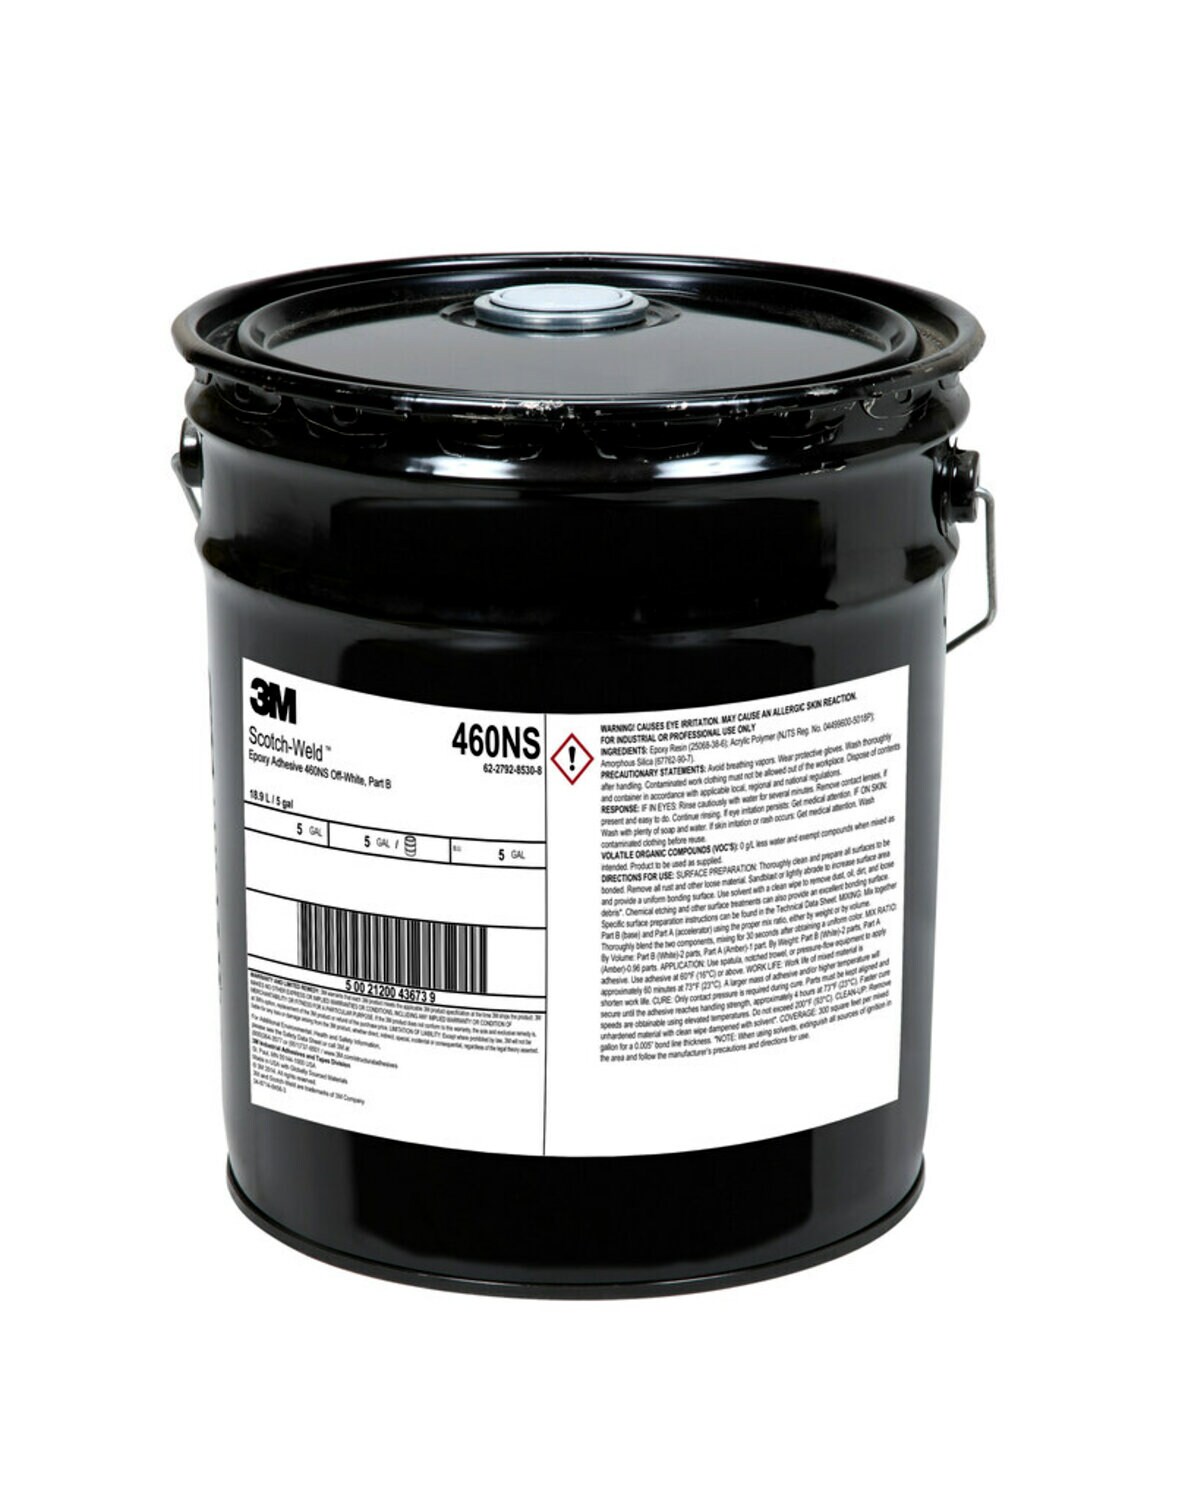 https://www.e-aircraftsupply.com/ItemImages/13/1139889E_3m-scotch-weld-epoxy-adhesive-460ns-off-white-part-b.jpg